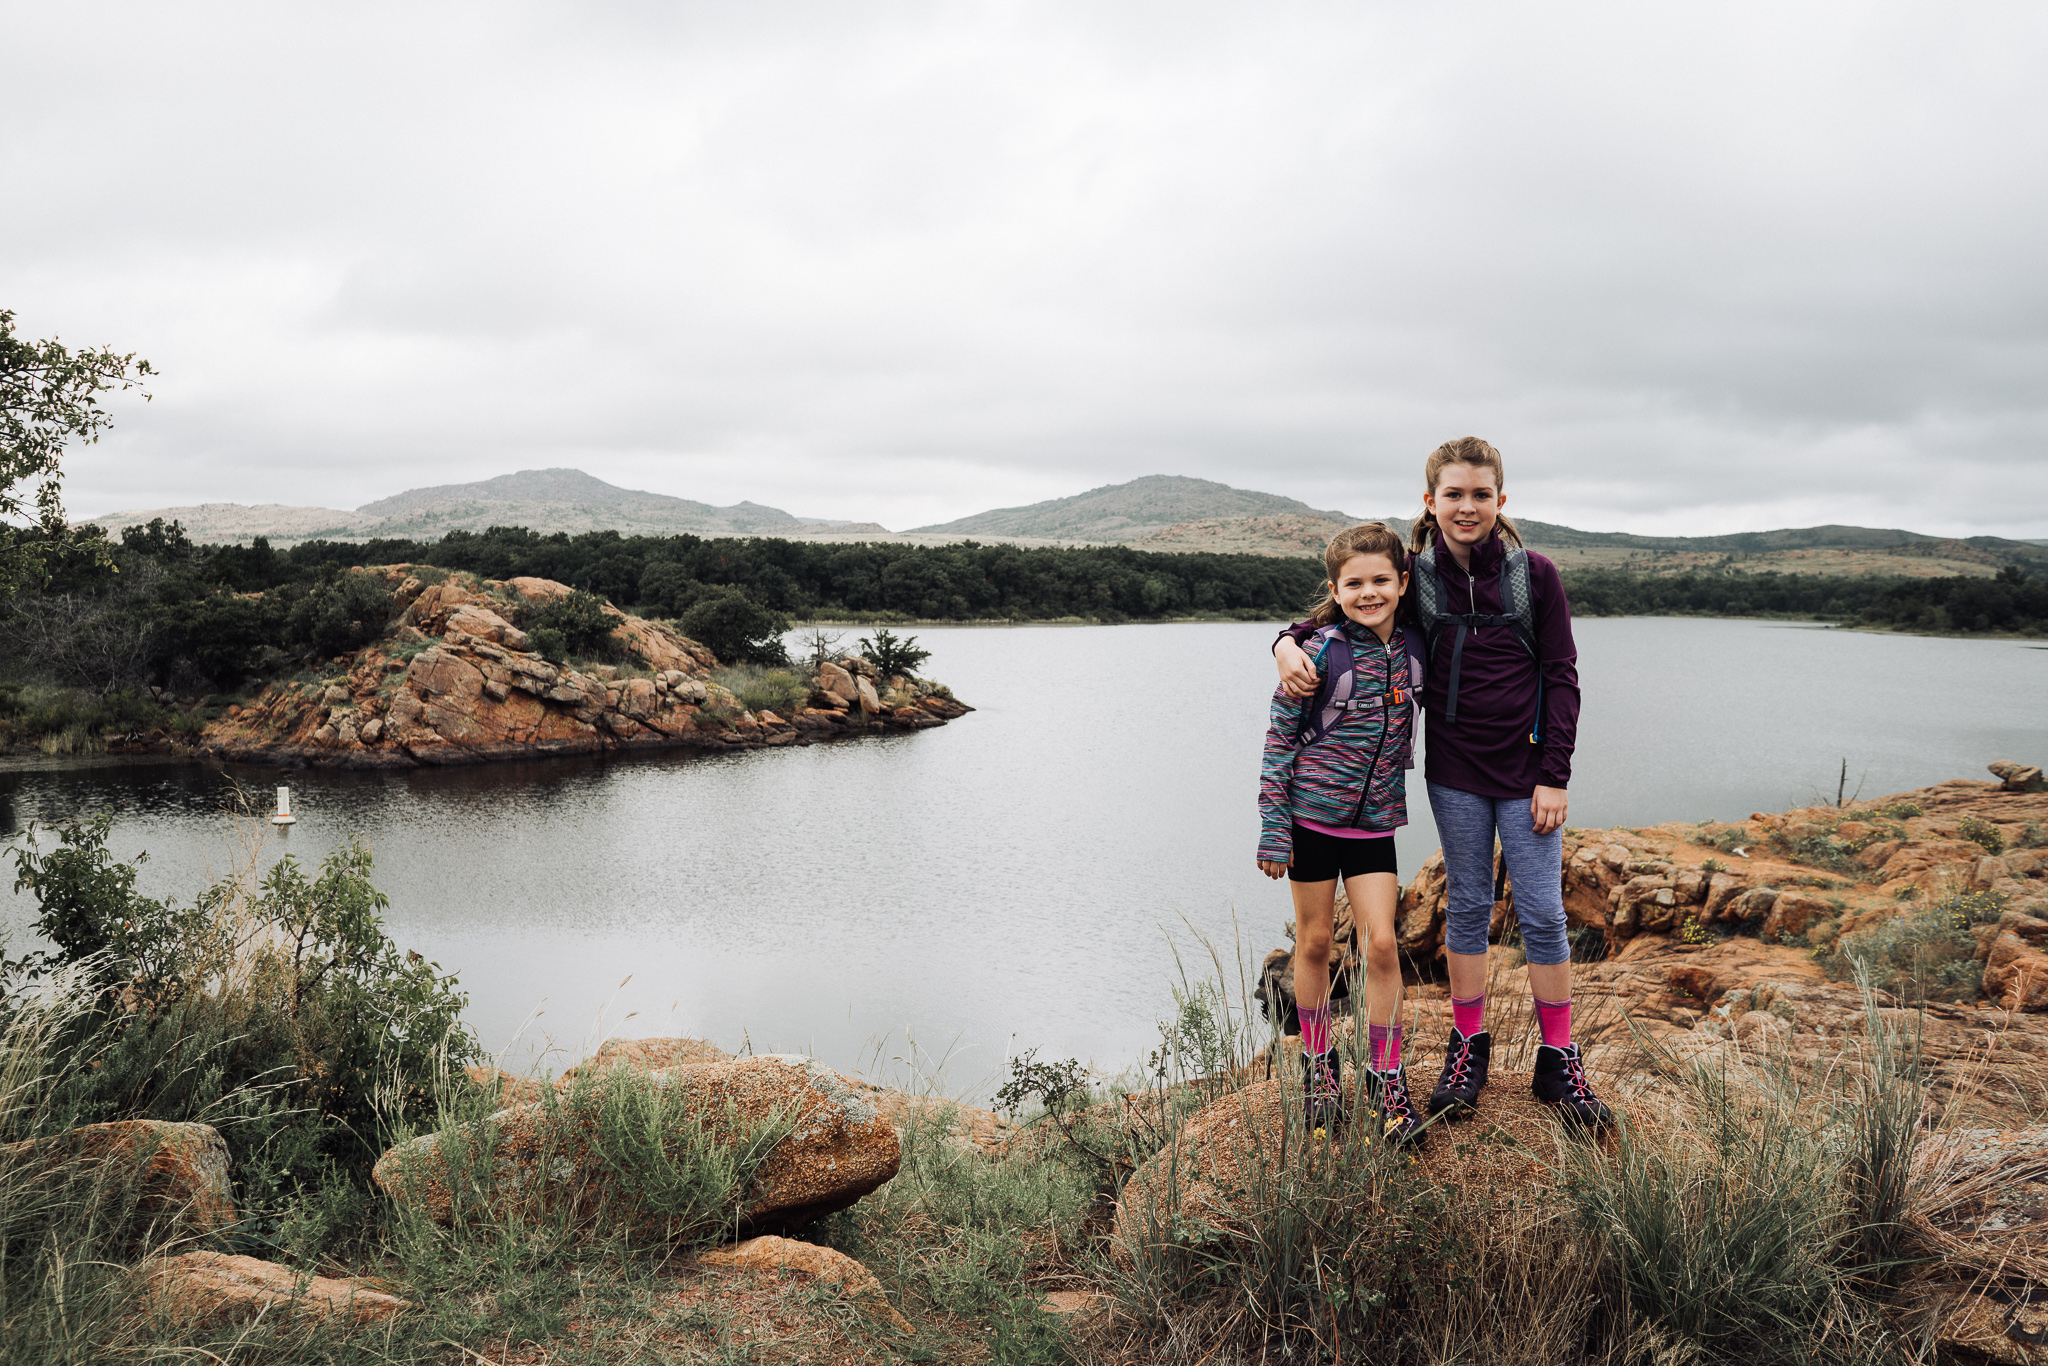 Daddy Daughters’ trip to Wichita Mountains